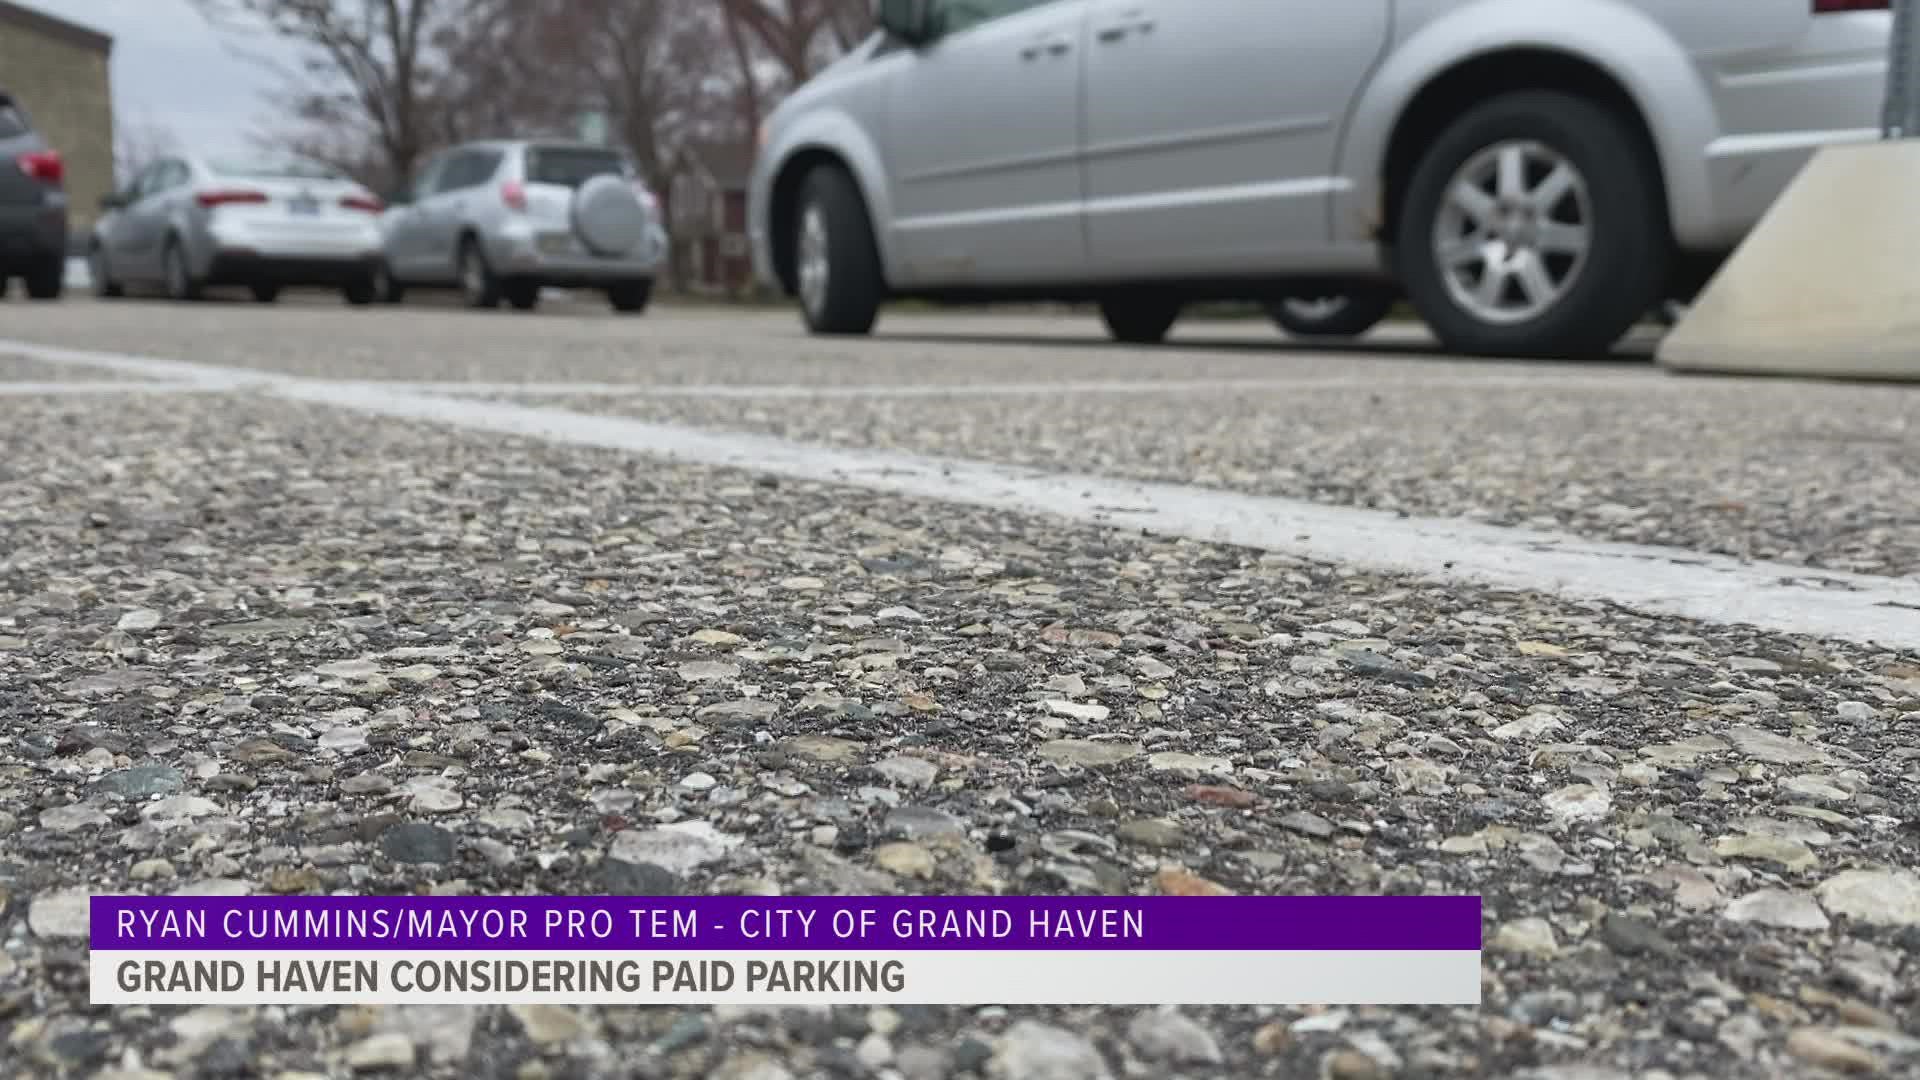 The idea to implement paid parking has been in the works for years, but as it finally comes to fruition, there is some push back from the community.